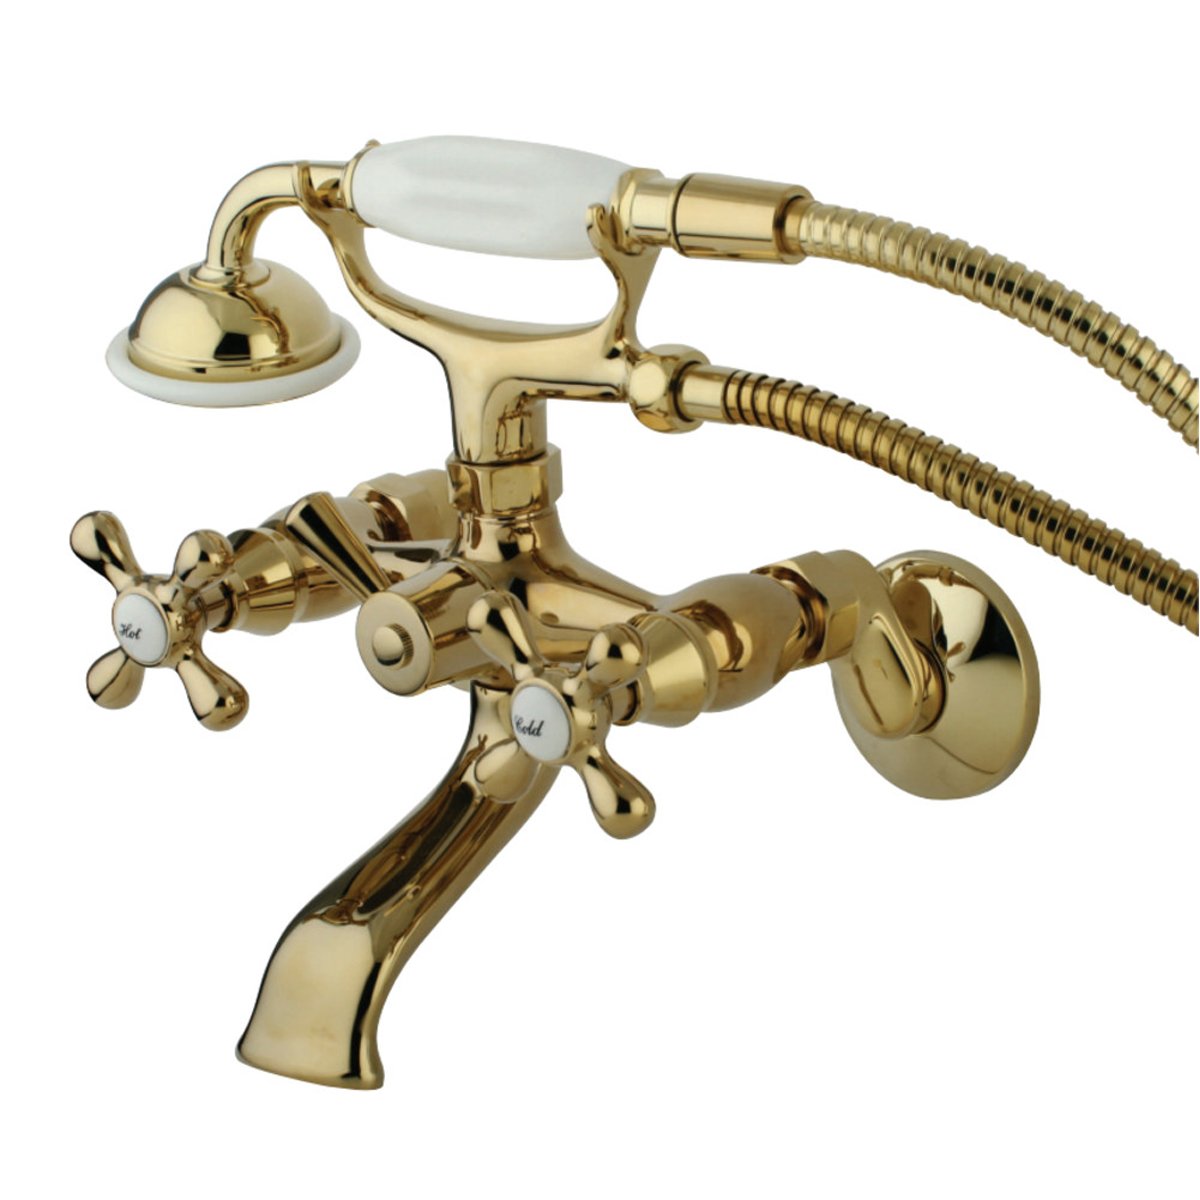 Kingston Brass CCK265SND Vintage Wall Mount Clawfoot Tub Faucet